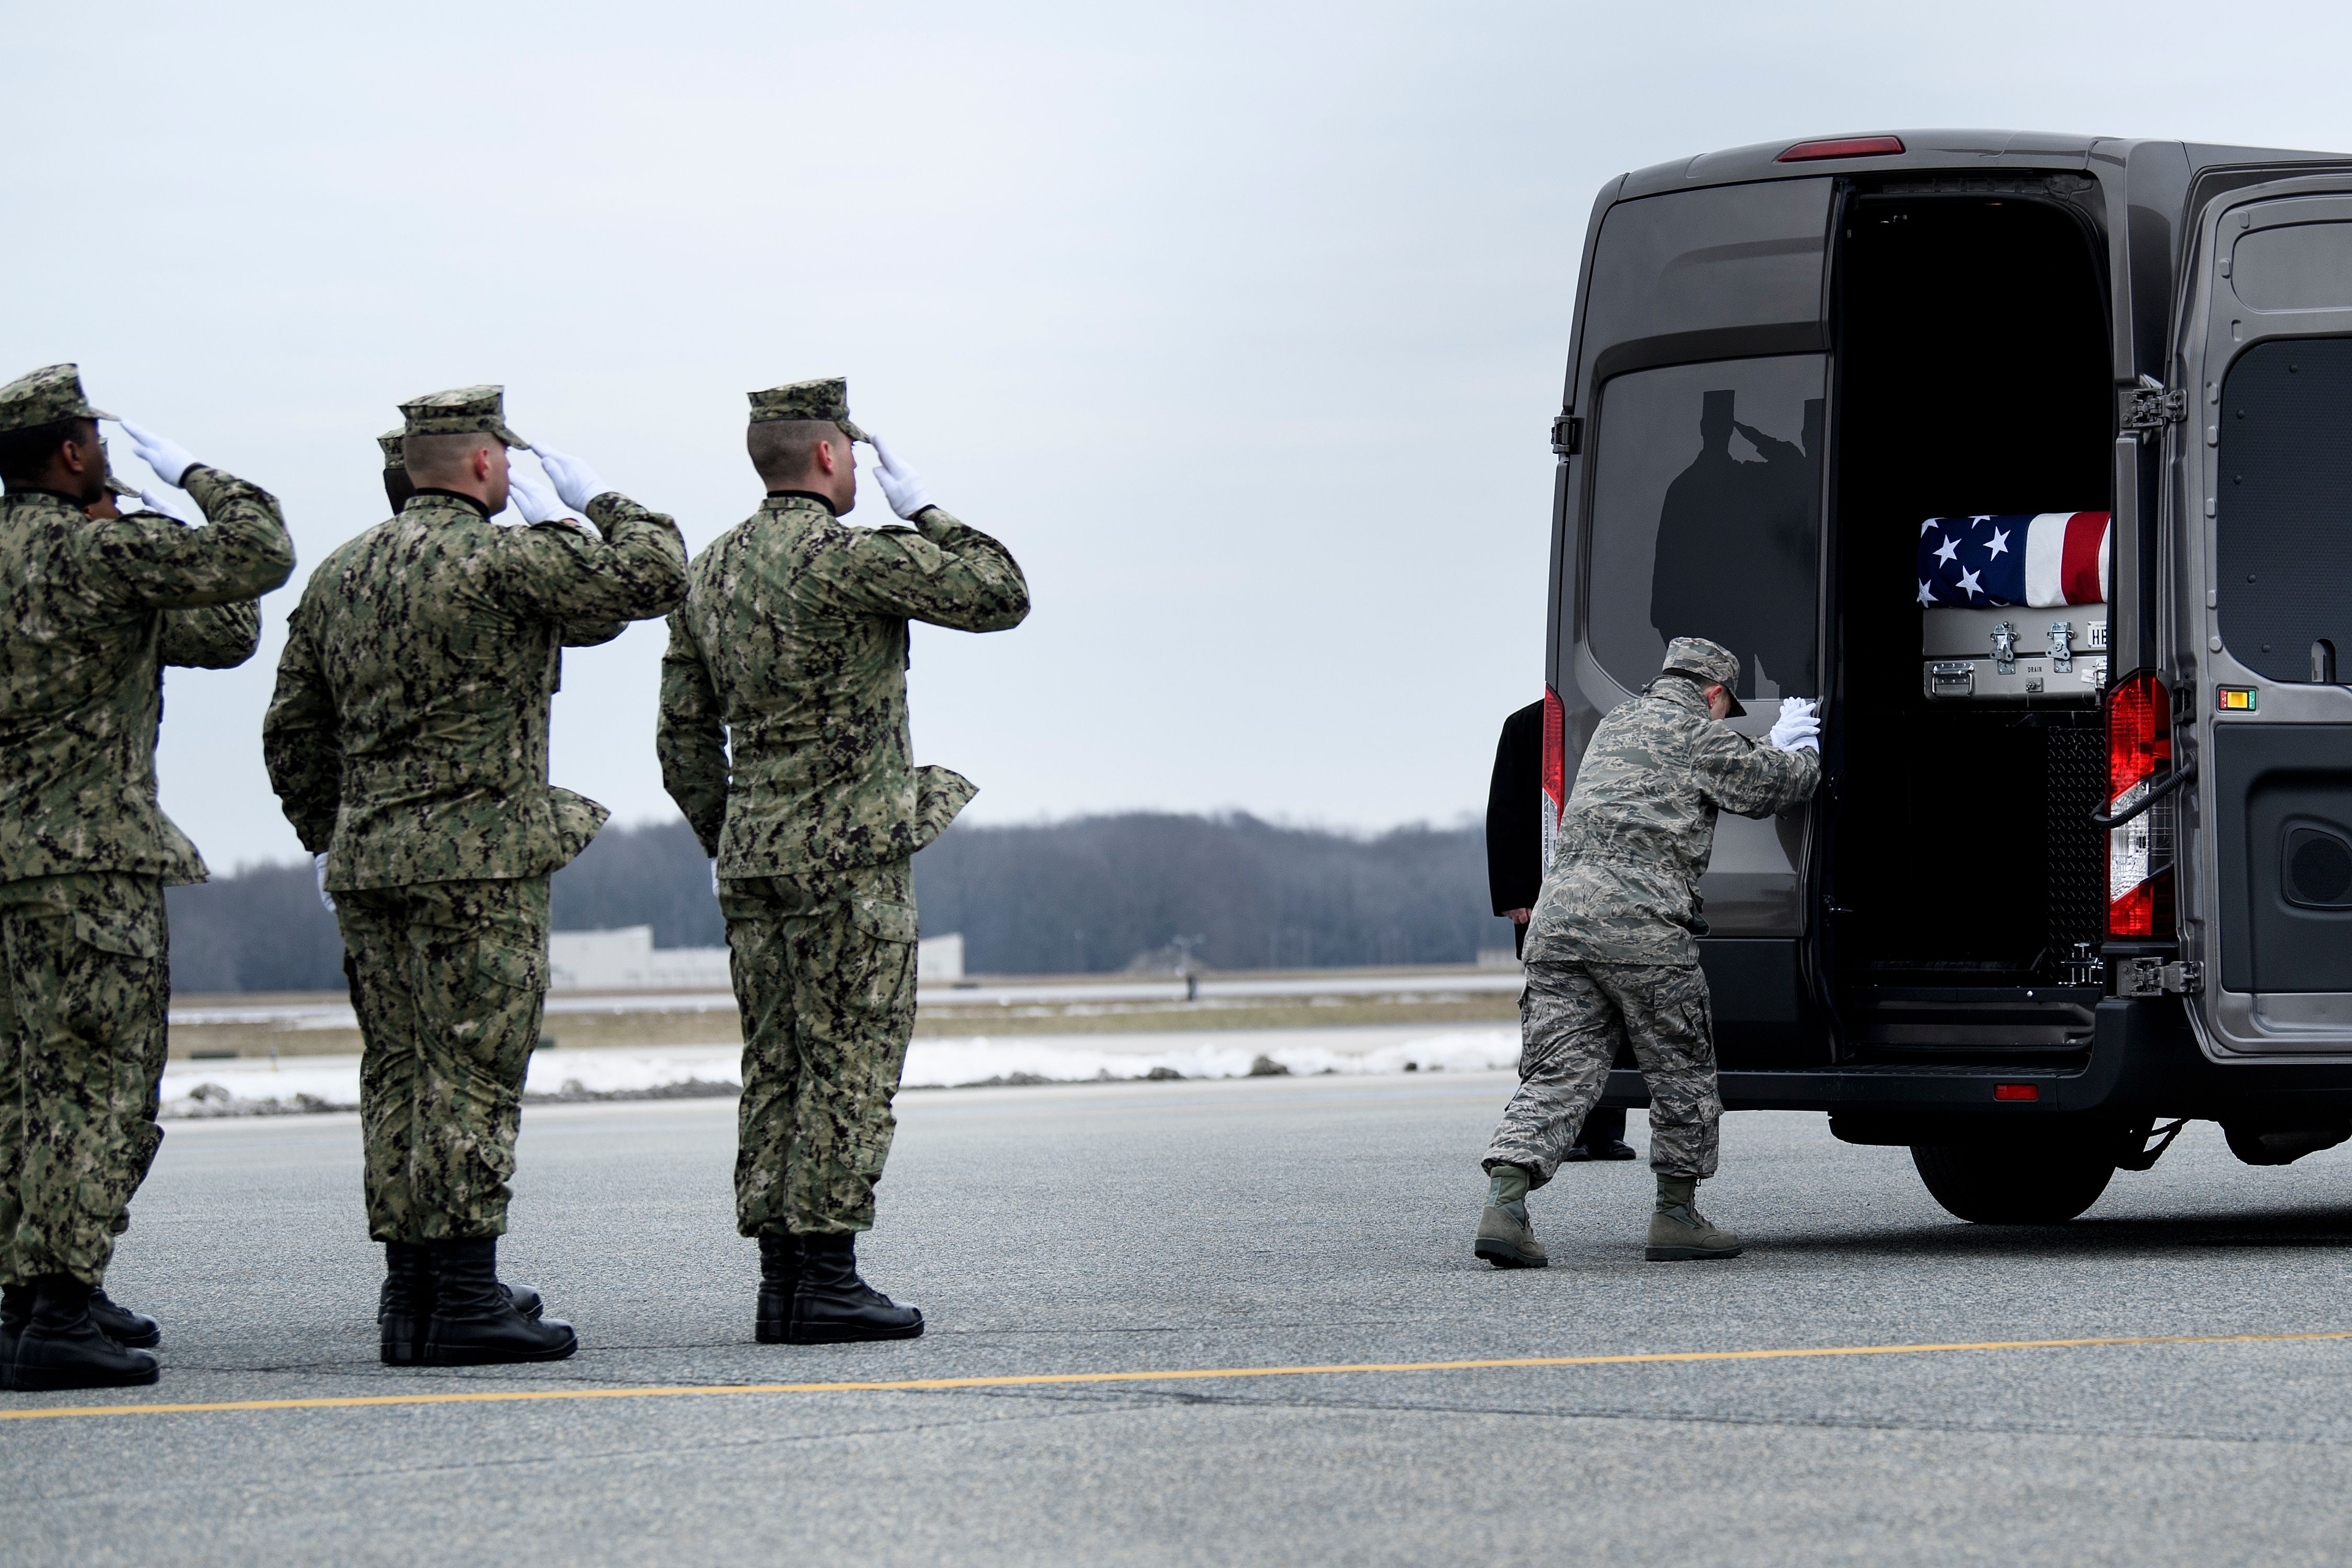 A member of the Air Force secures the remains of Scott A. Wirtz, a Defense Intelligence Agency civilian and former Navy Seal, in a vehicle during a dignified transfer for US personal killed in a suicide bombing in Syria, at Dover Air Force Base January 19, 2019 in Dover, Delaware. (BRENDAN SMIALOWSKI/AFP/Getty Images)